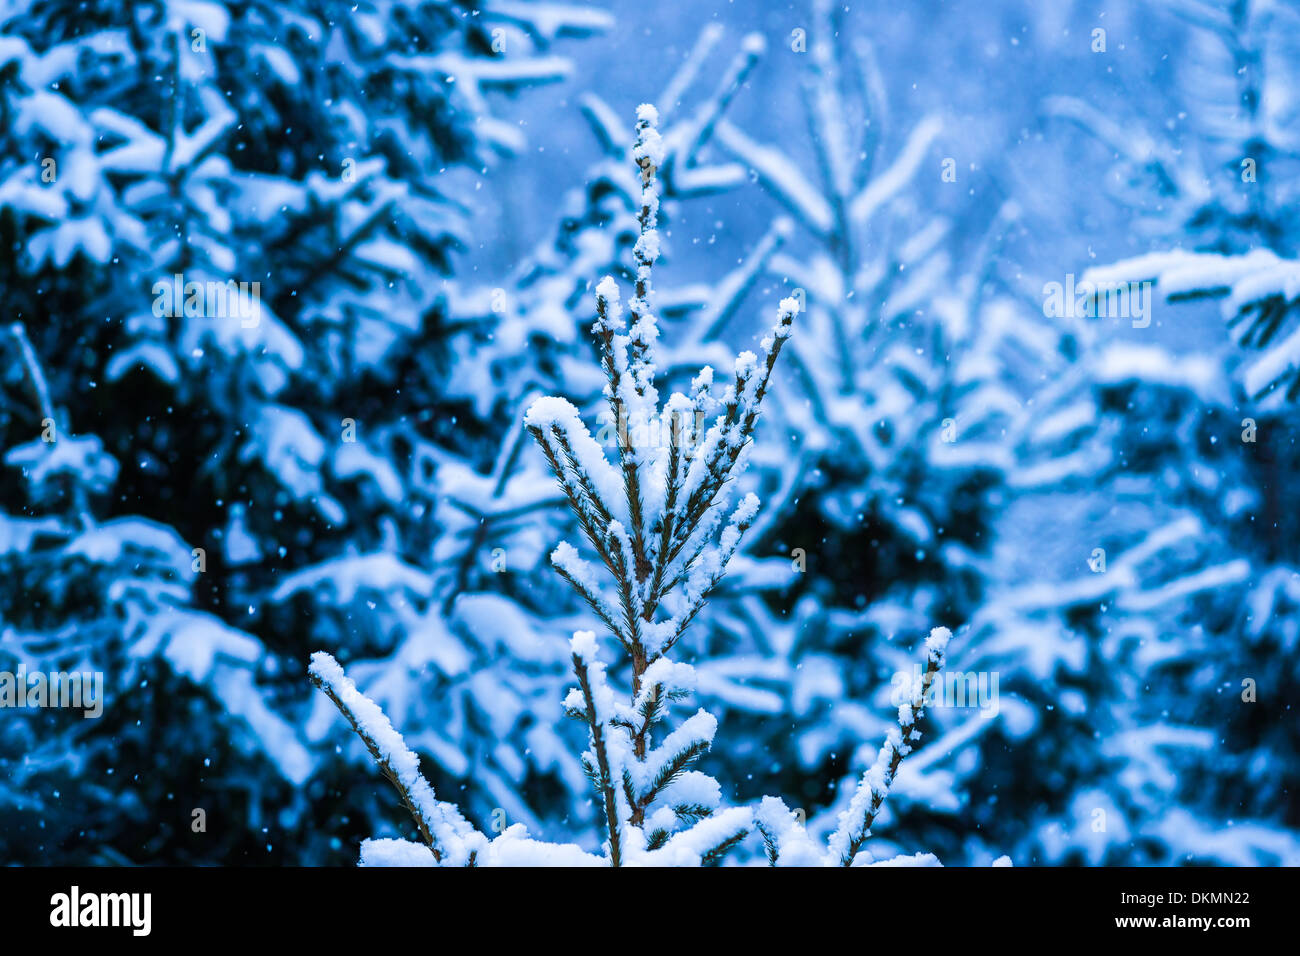 Winter Snow Christmas Tree 5. Fresh snow covered spruce trees in the forest in snowstorm. Dark green, blue and white colors. Stock Photo